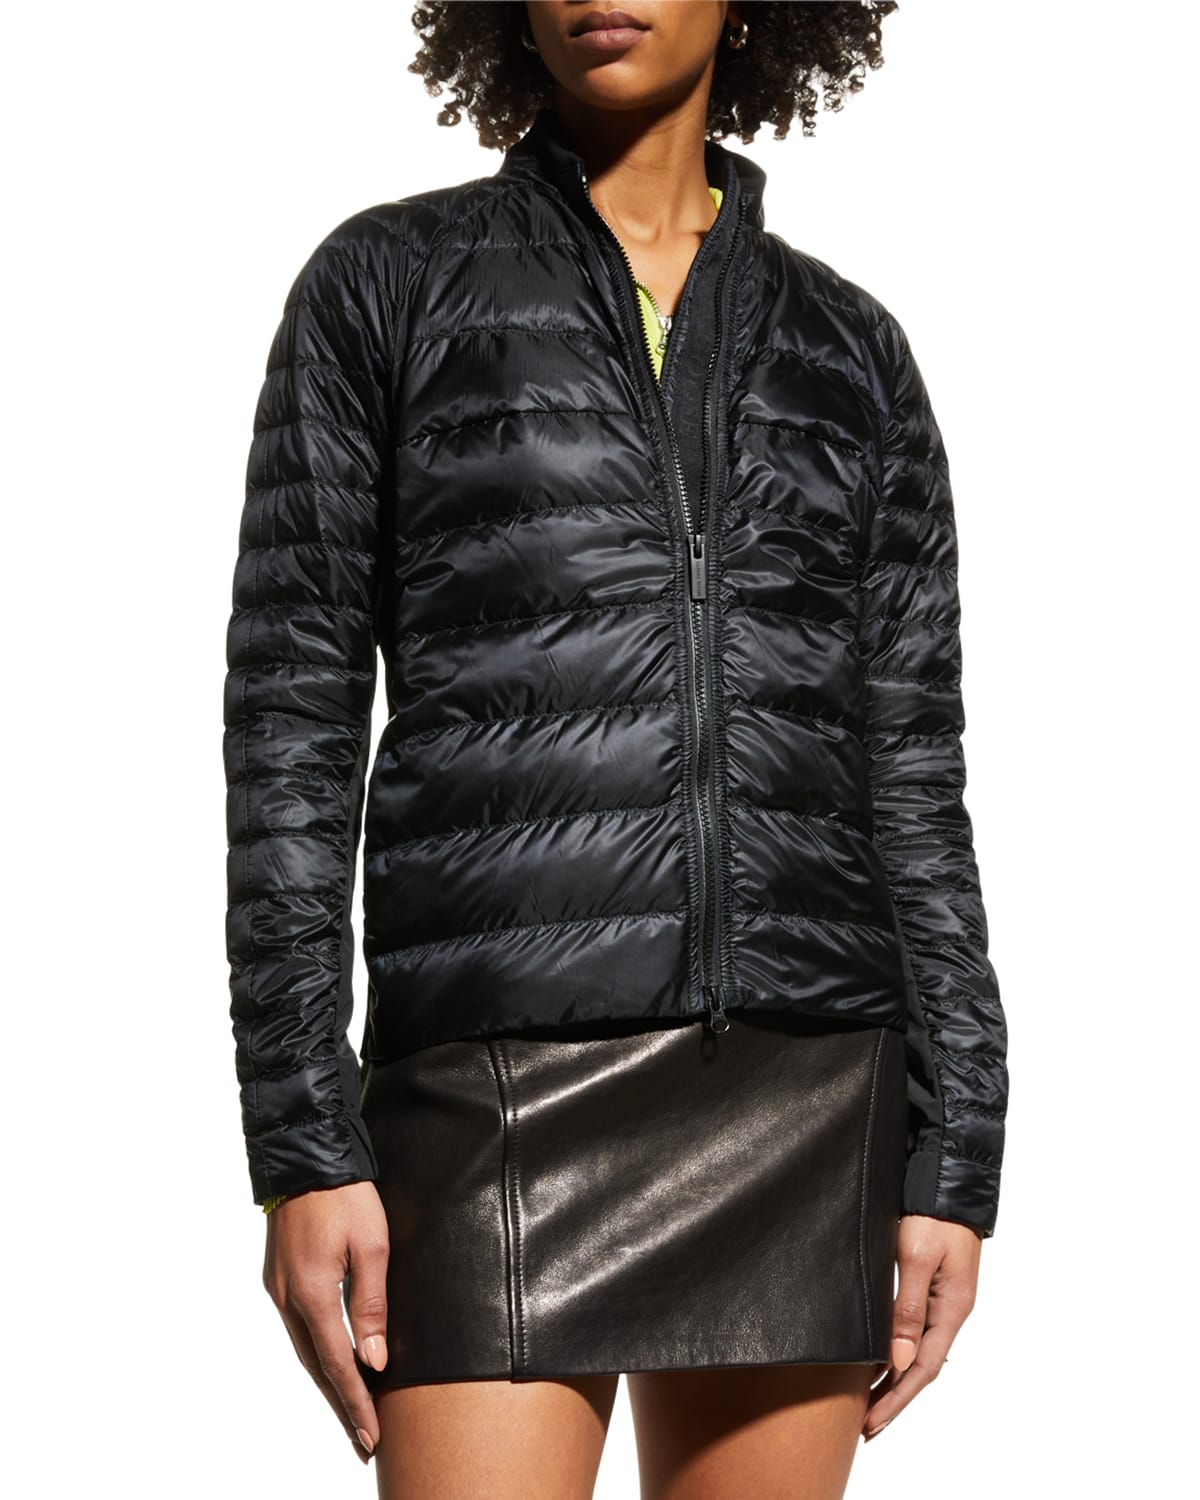 Roncy Recycled Nylon Quilted Jacket